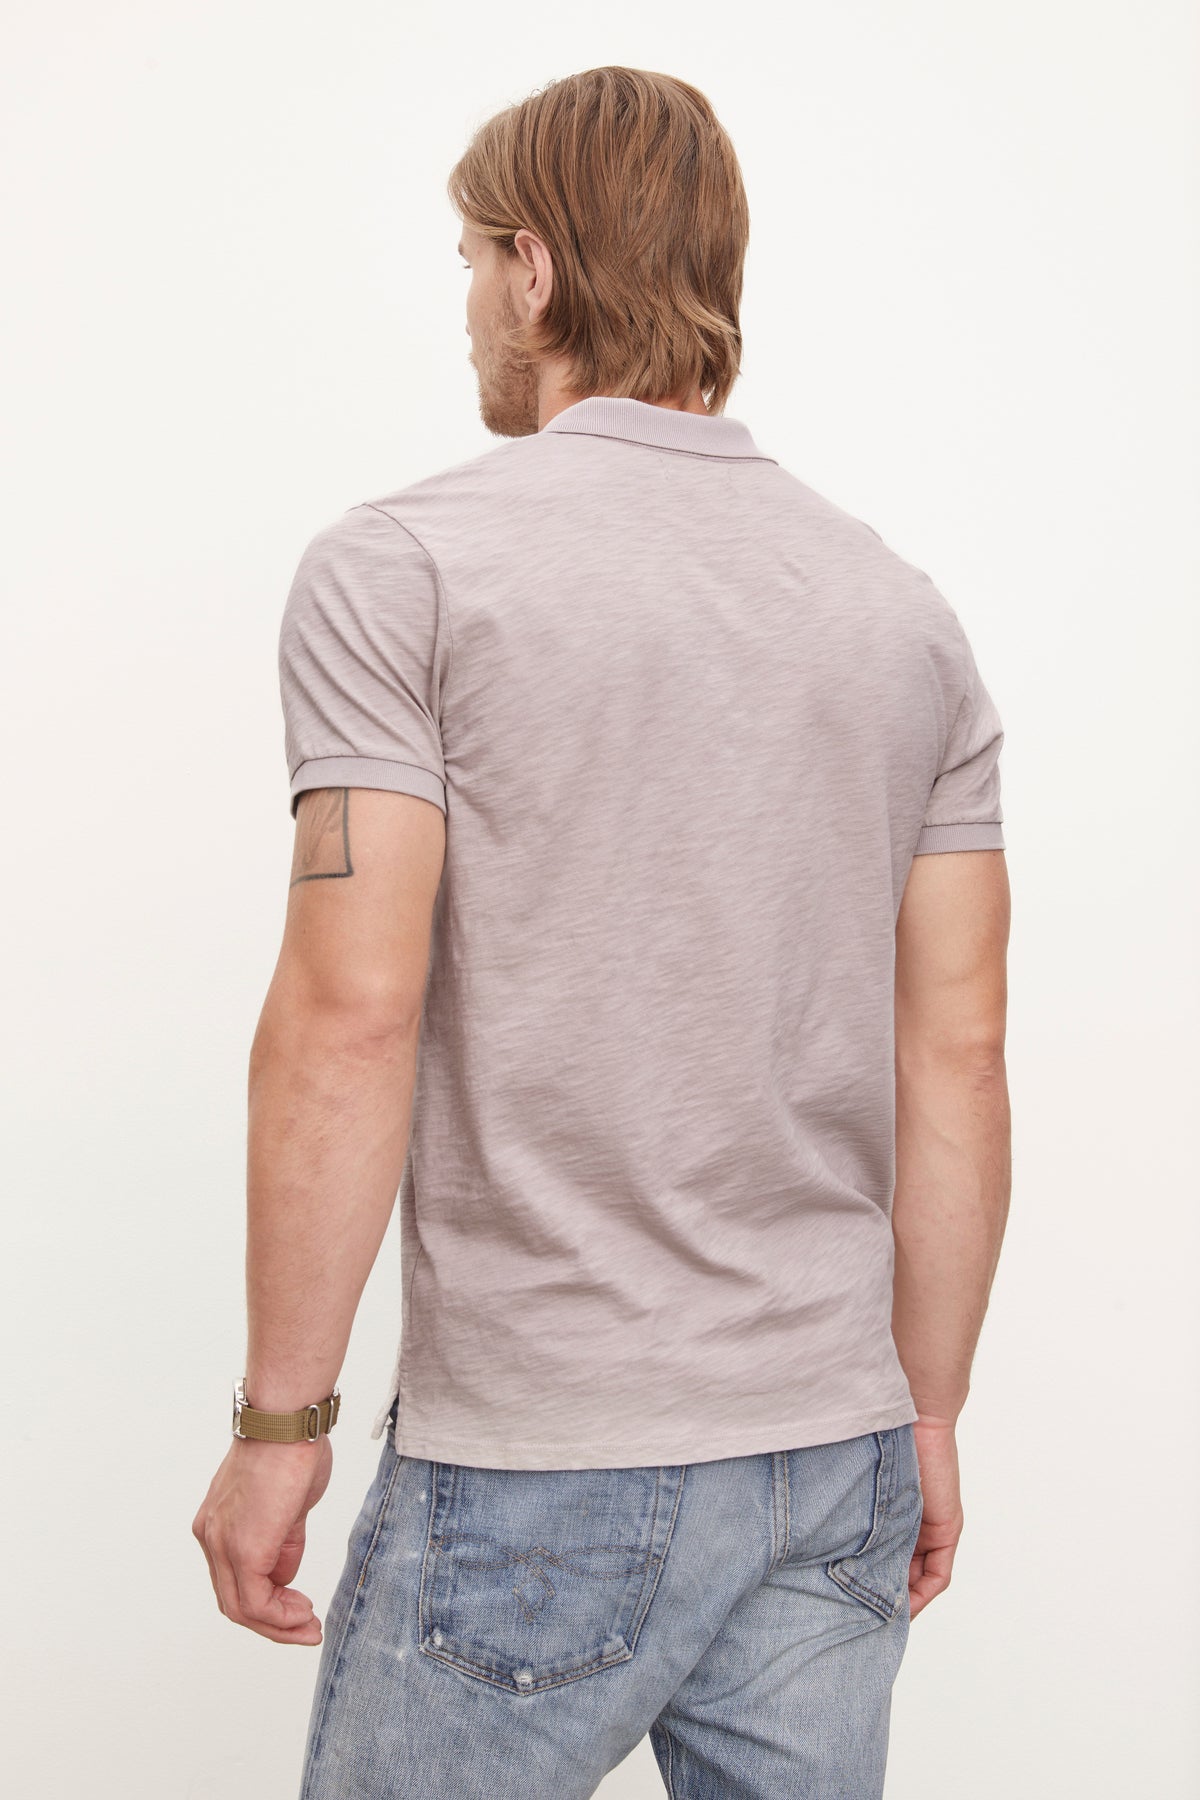 The back of a man wearing jeans and a Velvet by Graham & Spencer NIKO POLO made of soft cotton slub.-36009174139073